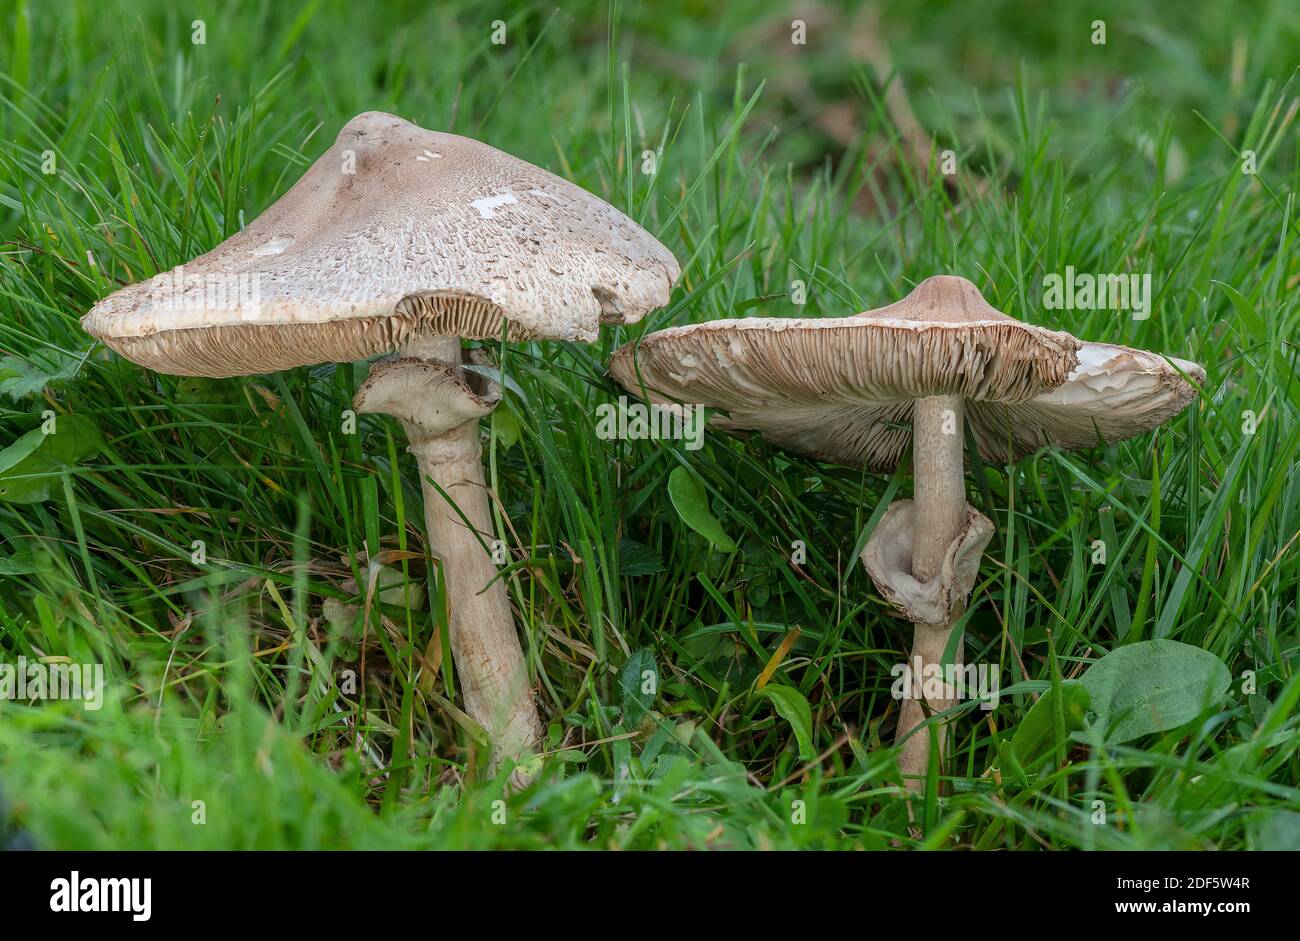 A parasol mushroom, Macrolepiota excoriata, growing in unimproved old meadow, Dorset. Stock Photo